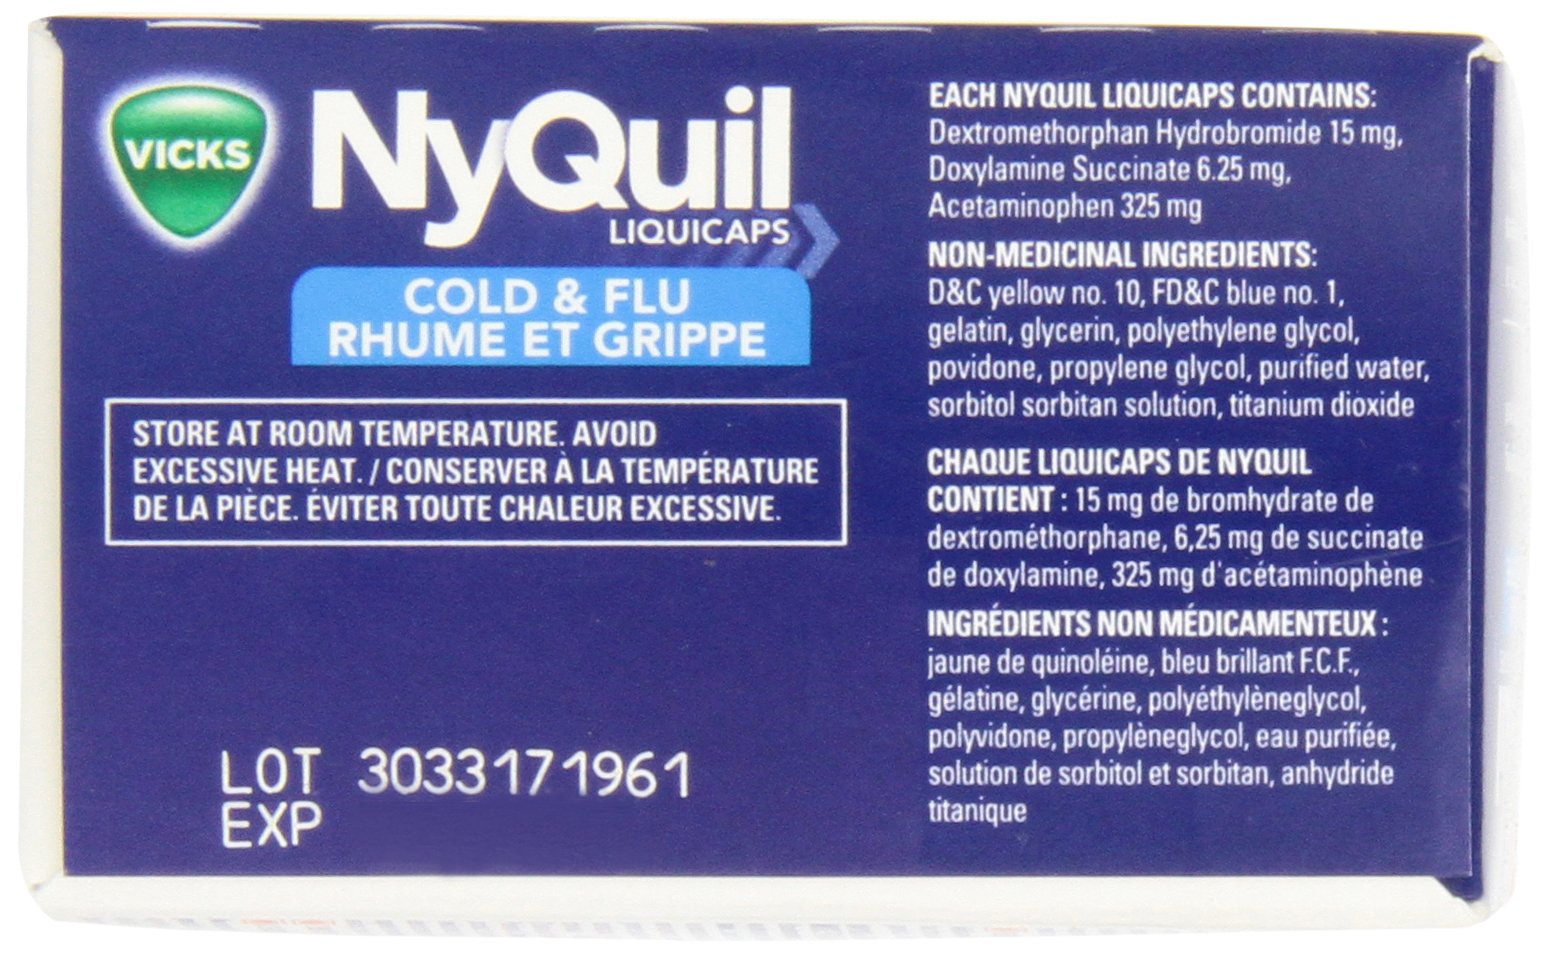 Vicks DayQuil Cold & Flu Multi-Symptom Relief Liquid Capsules + Vicks NyQuil Cold & Flu Multi-Symptom Relief Liquid Capsules, Total 48 Count